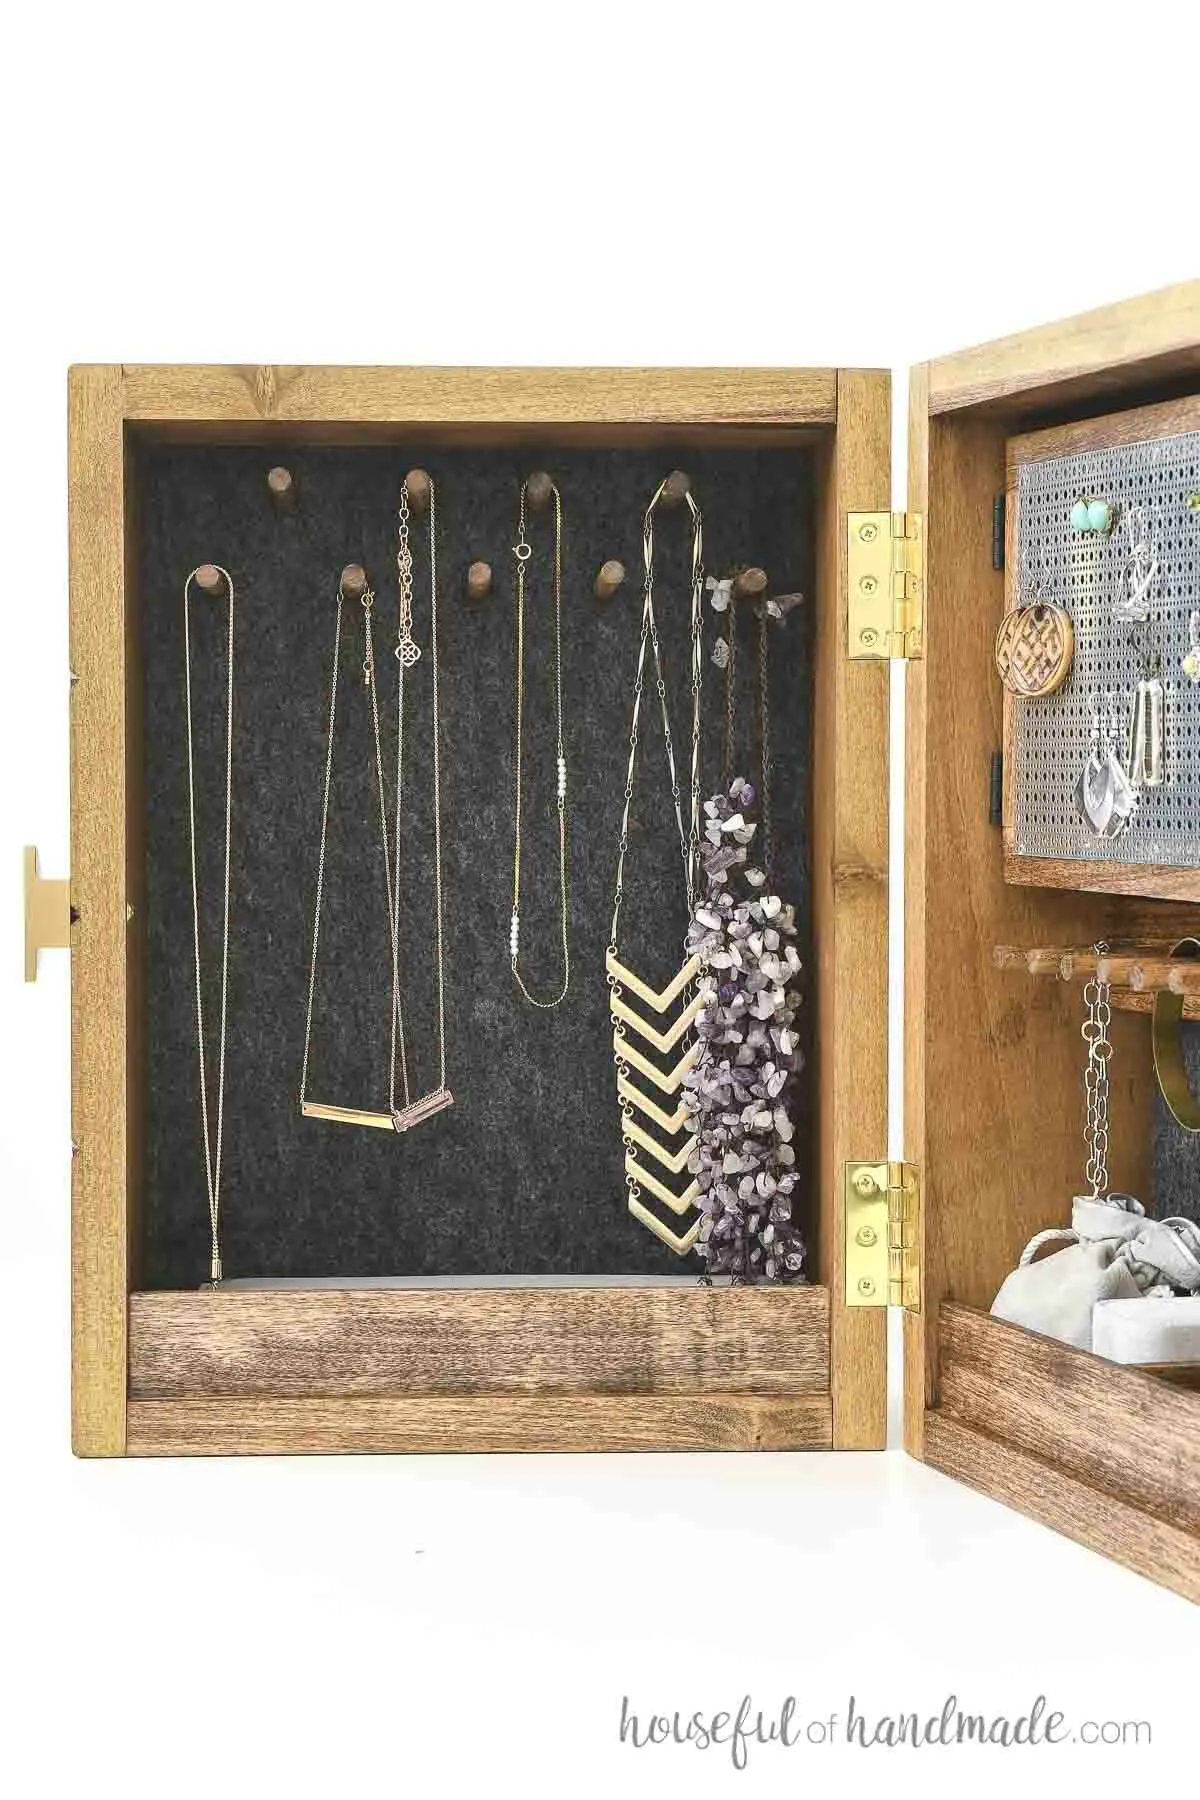 Close up of the necklace storage area in the large jewelry box.